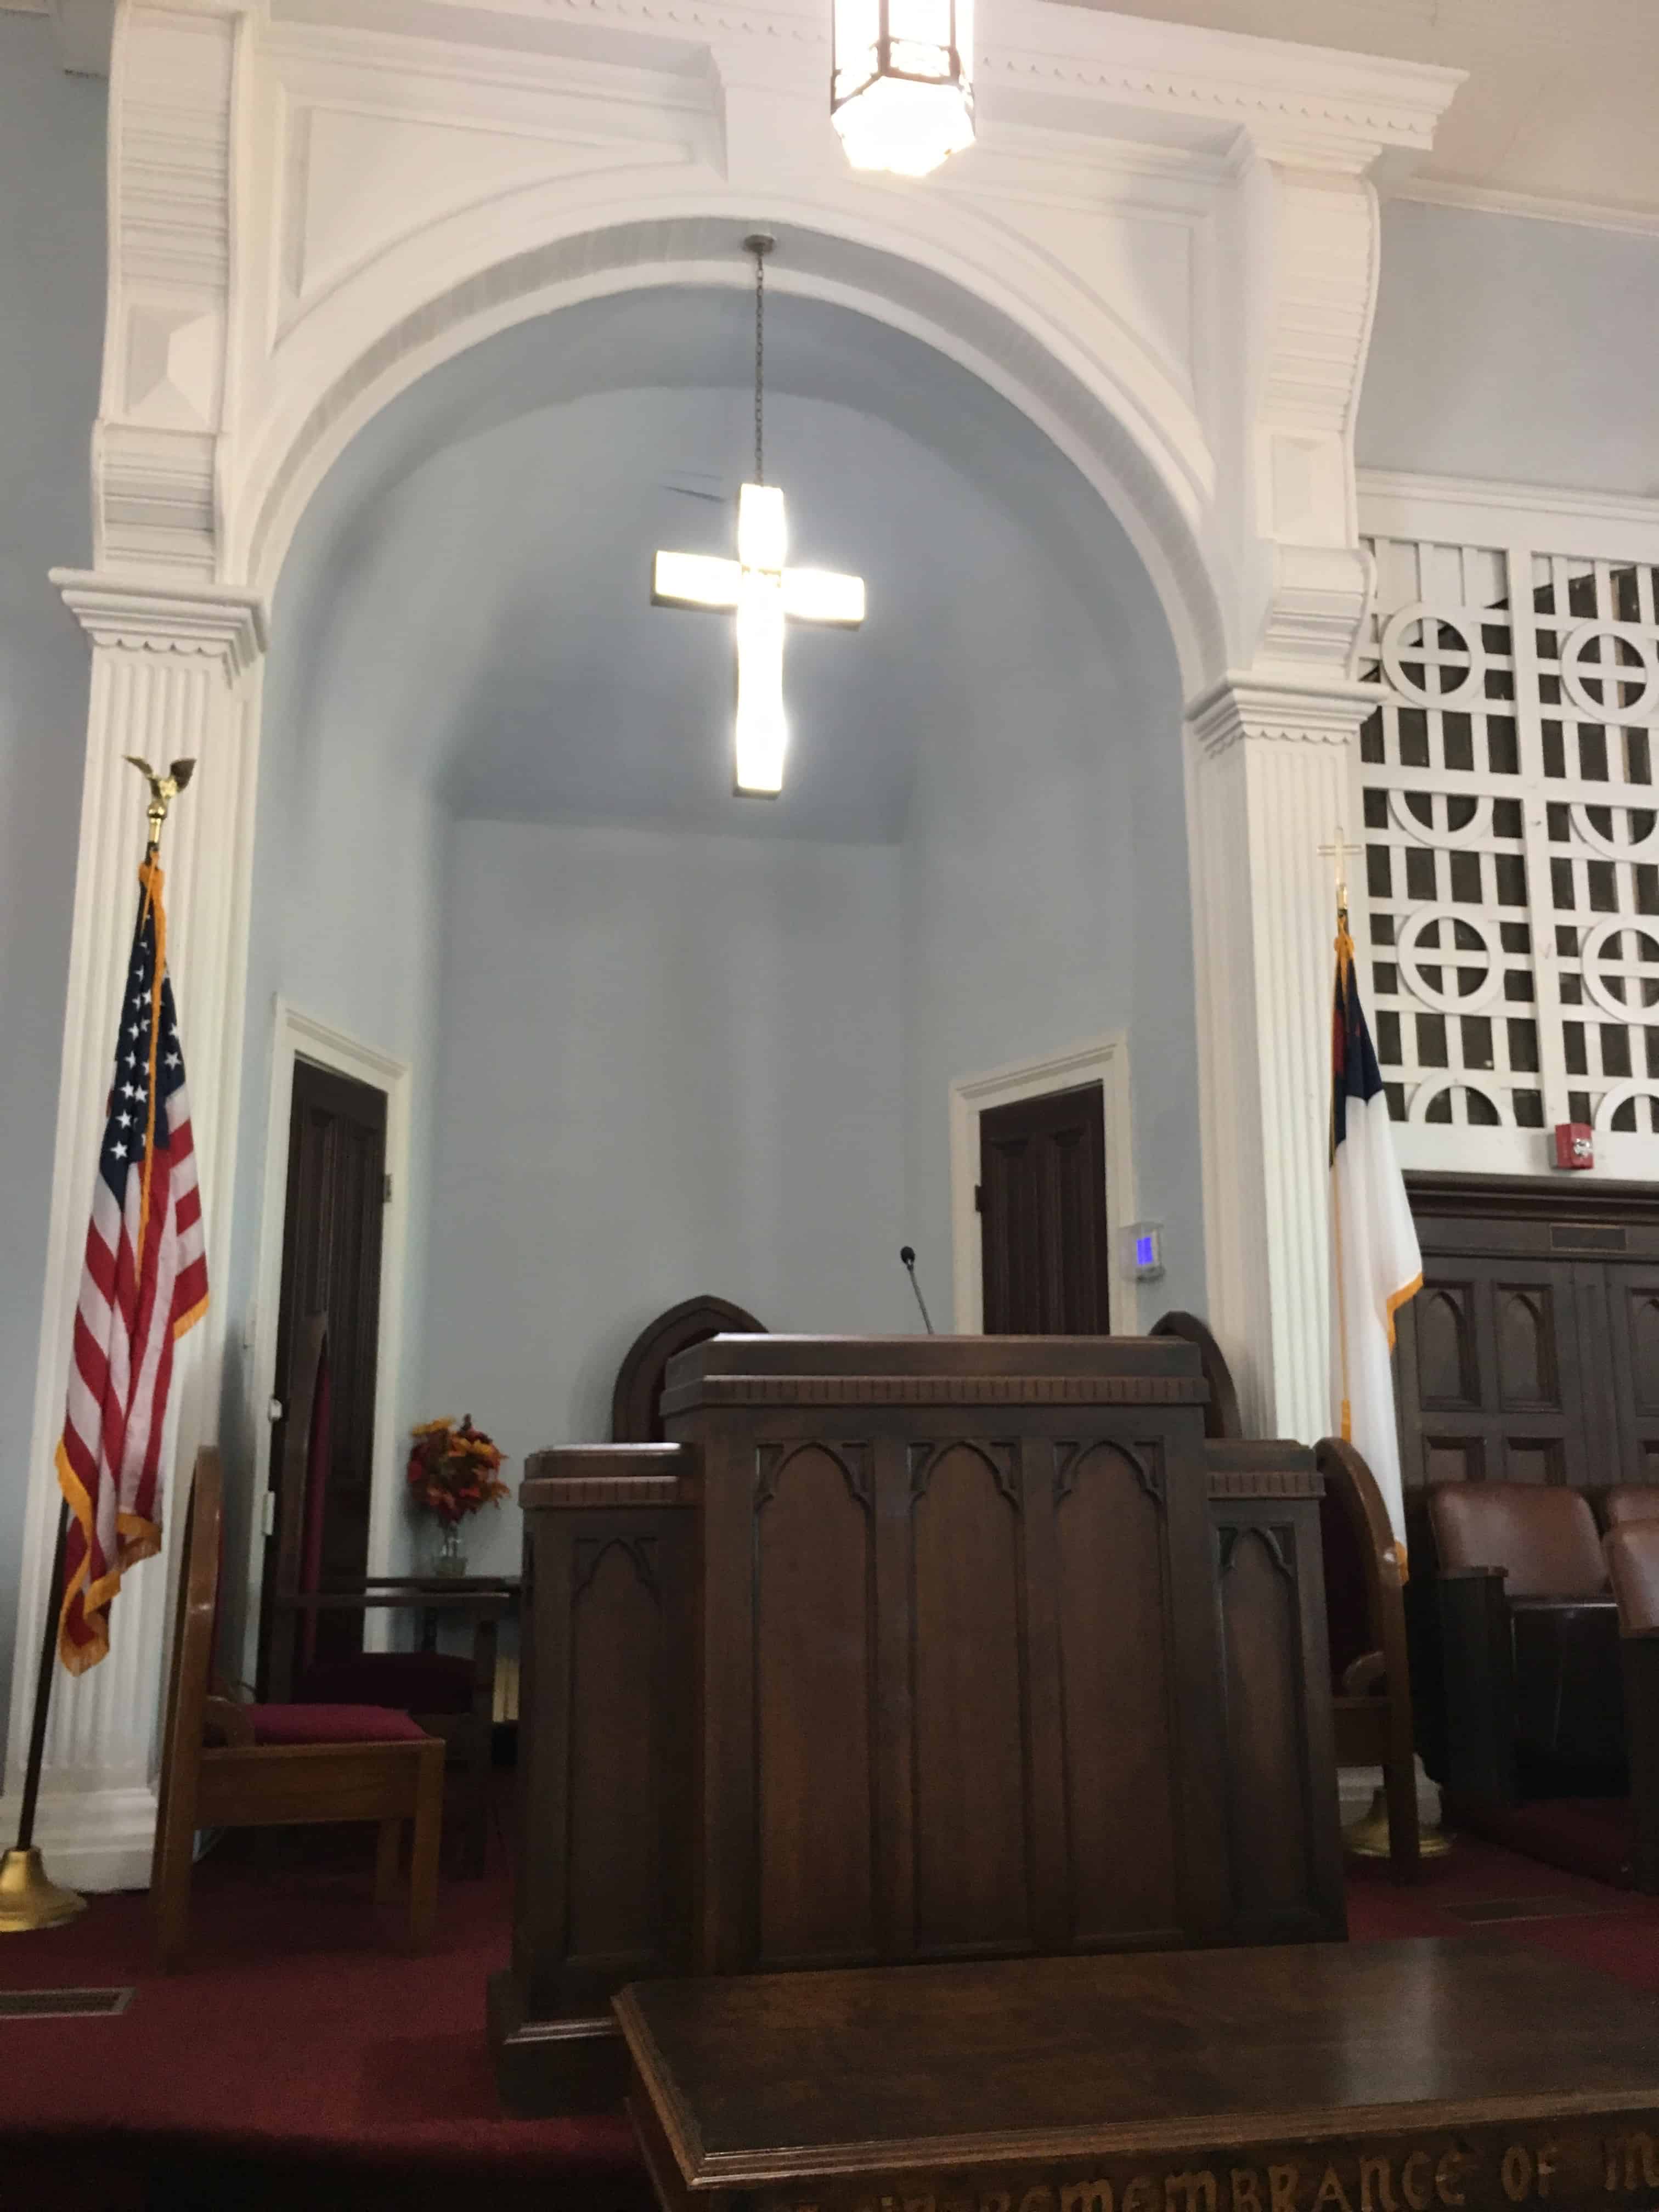 Pulpit at Dexter Avenue King Memorial Baptist Church in Montgomery, Alabama